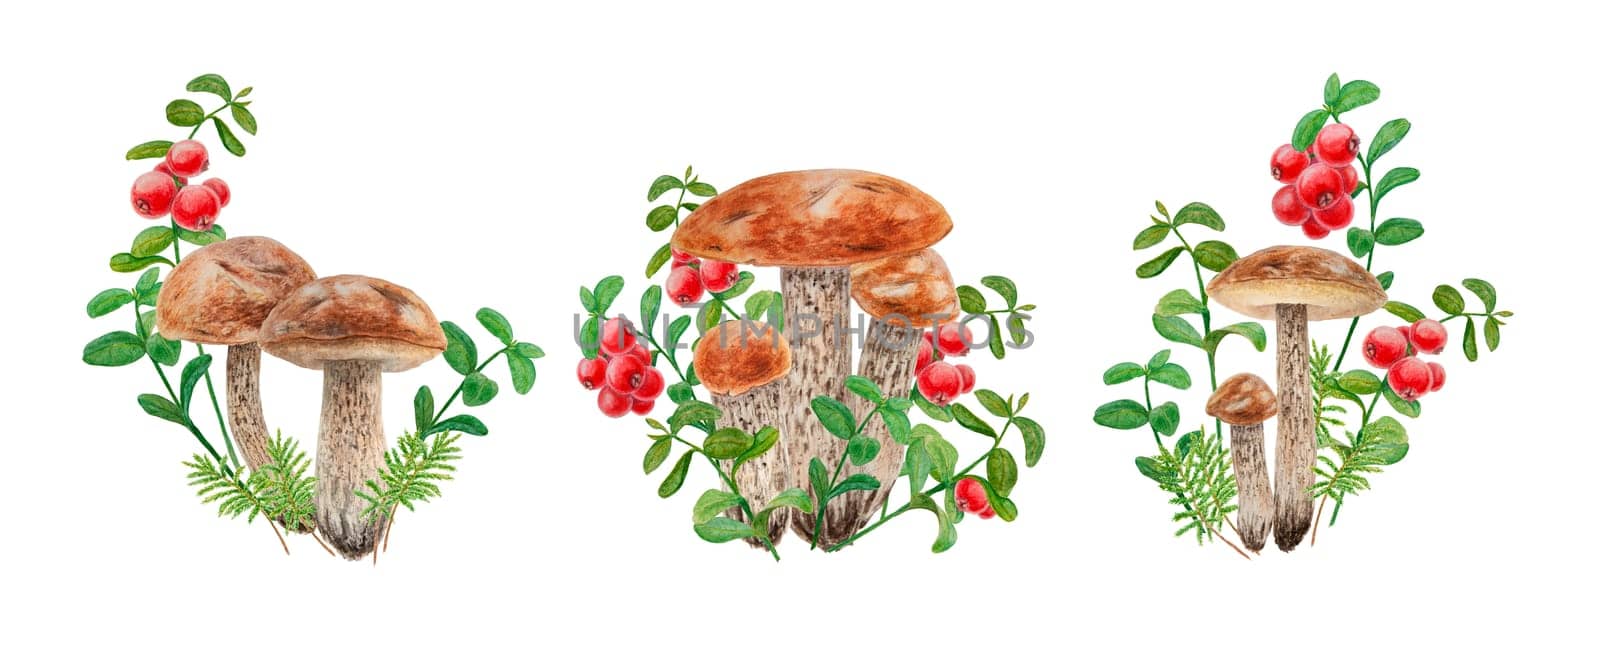 Clip art collection of forest wild red berries and edible mushrooms. Realistic watercolor botanical illustrations of juisy cranberry, cowberry and boletus for prints, fabric, postcards, menus, sticker by florainlove_art